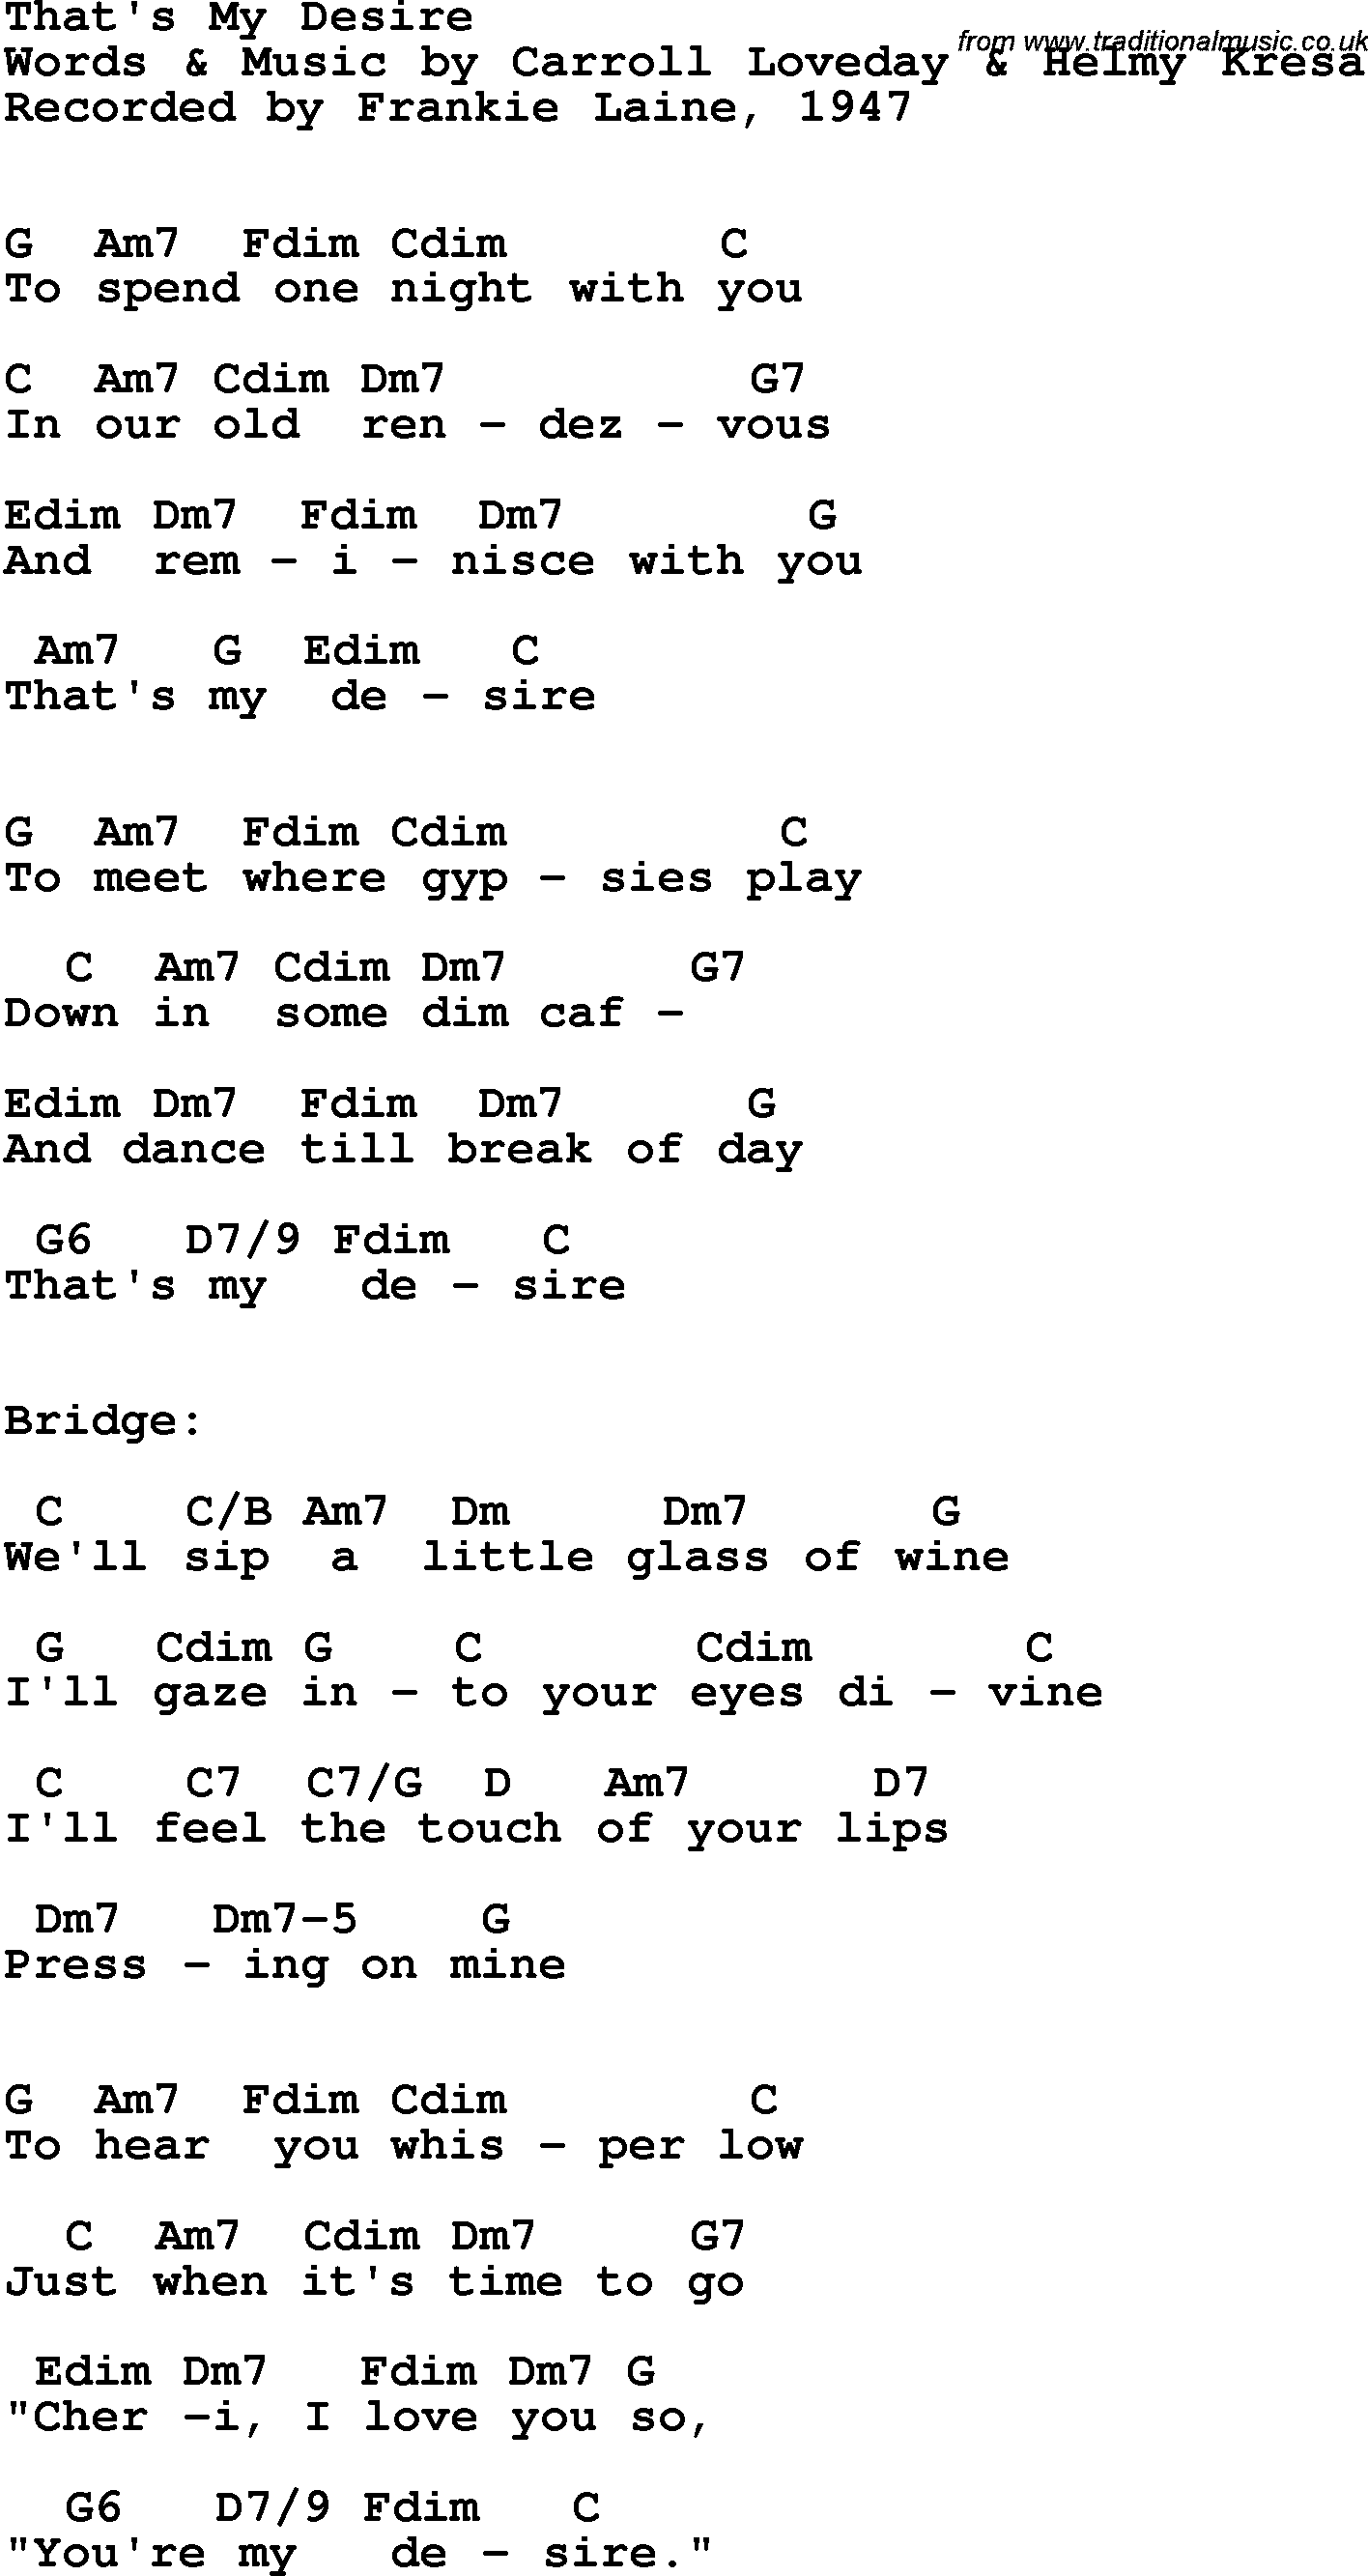 Song Lyrics with guitar chords for That's My Desire -  Frankie Laine, 1947